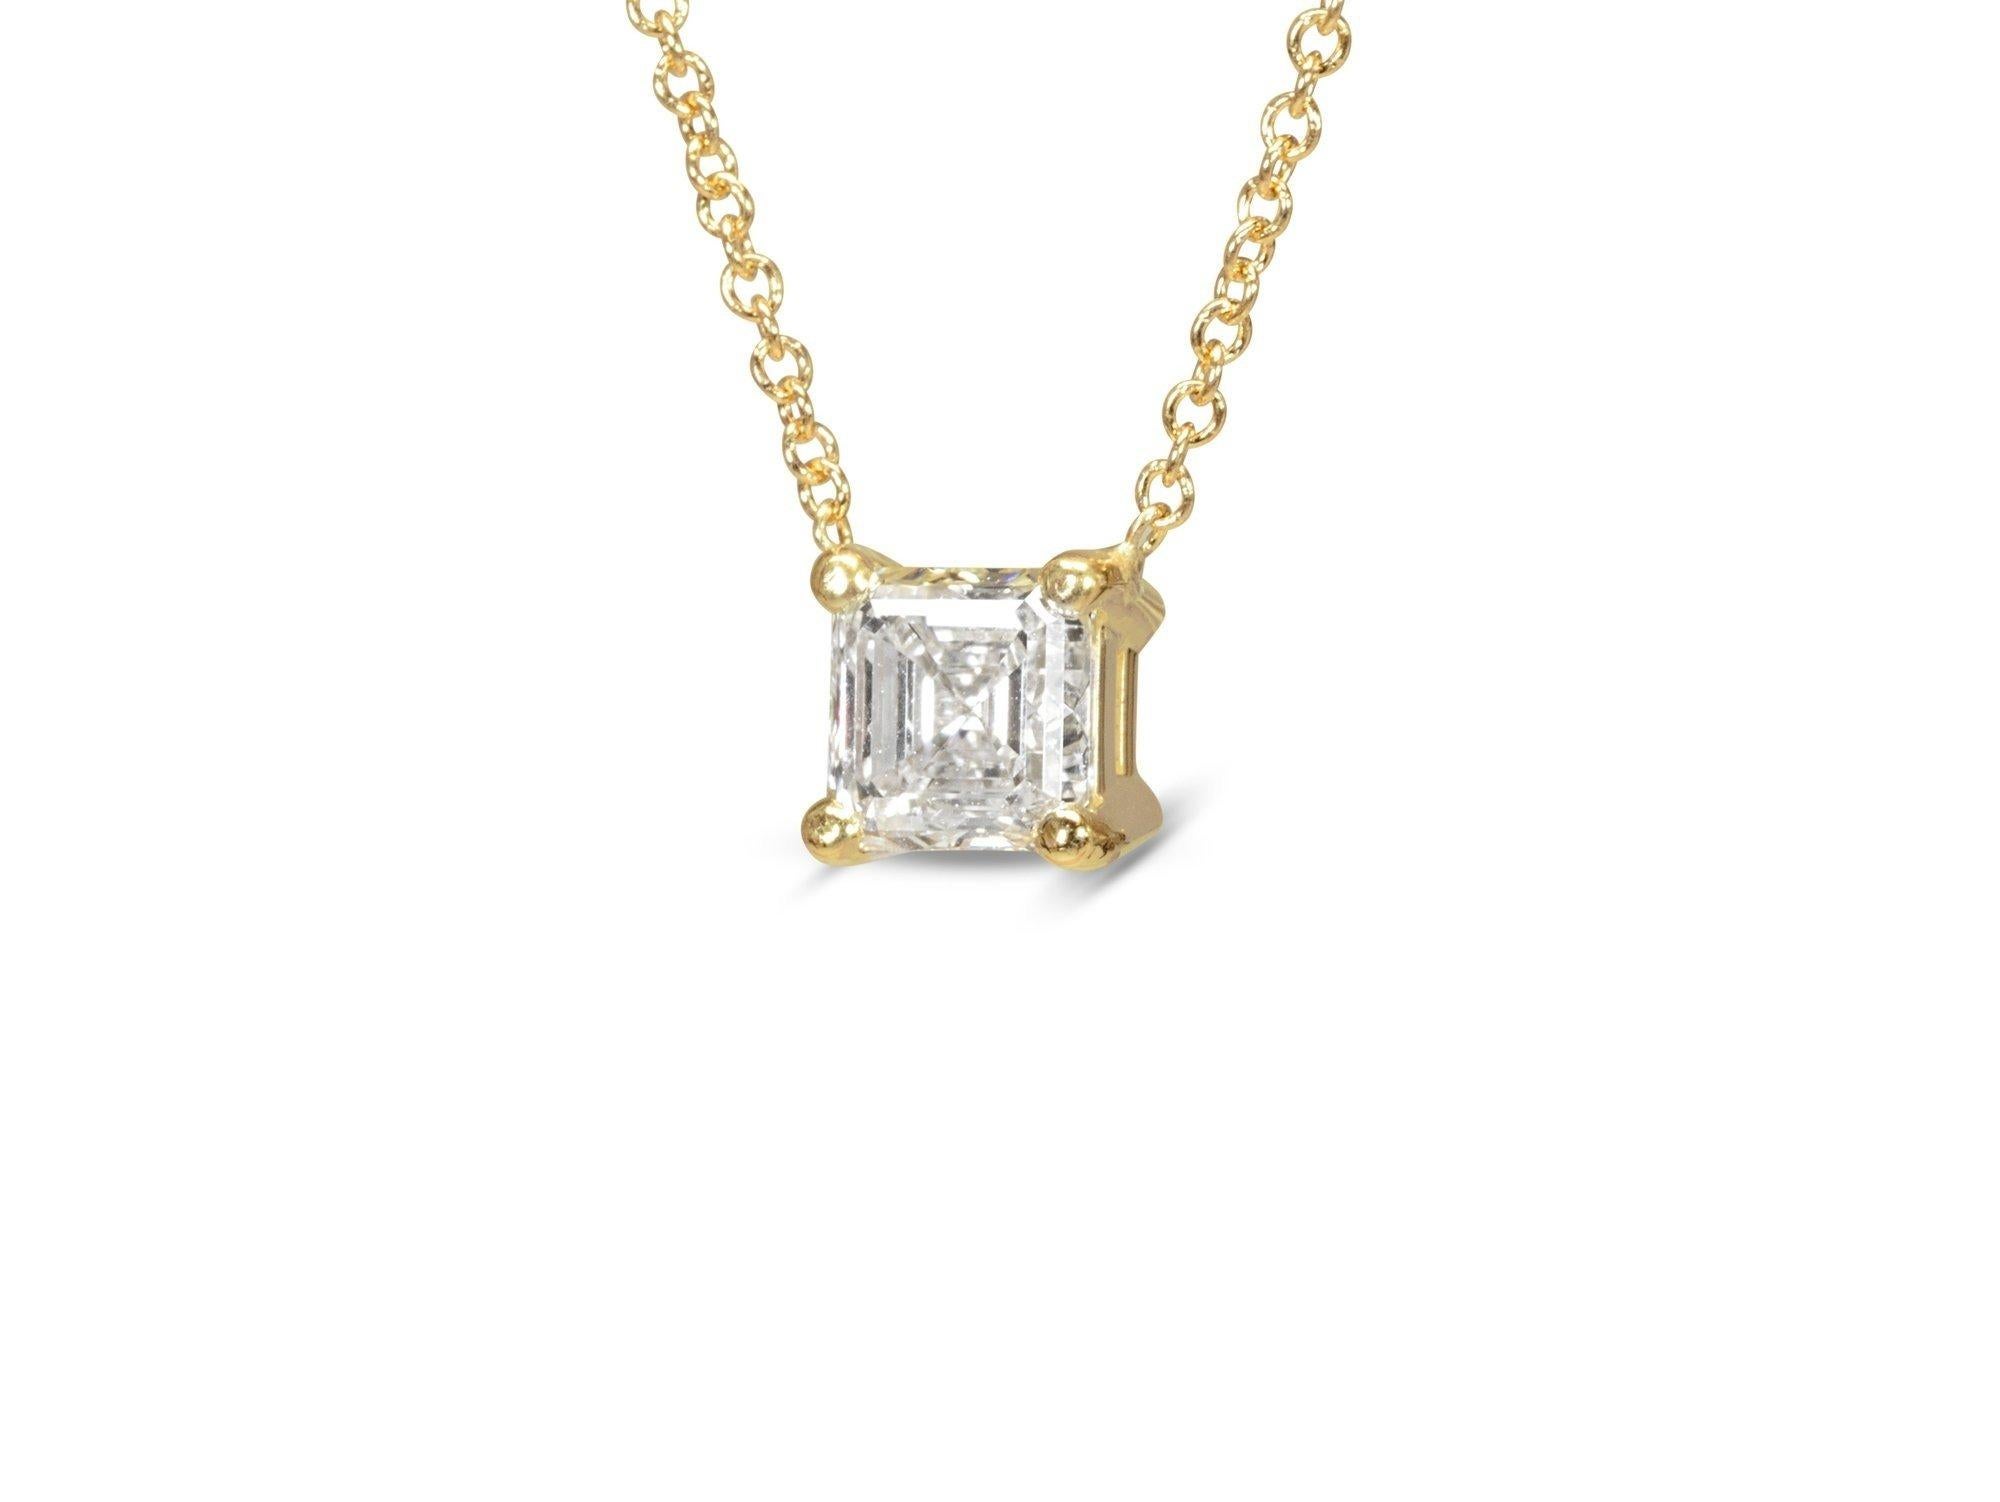 Stunning Necklace with a dazzling 1-carat square cut natural diamond 2